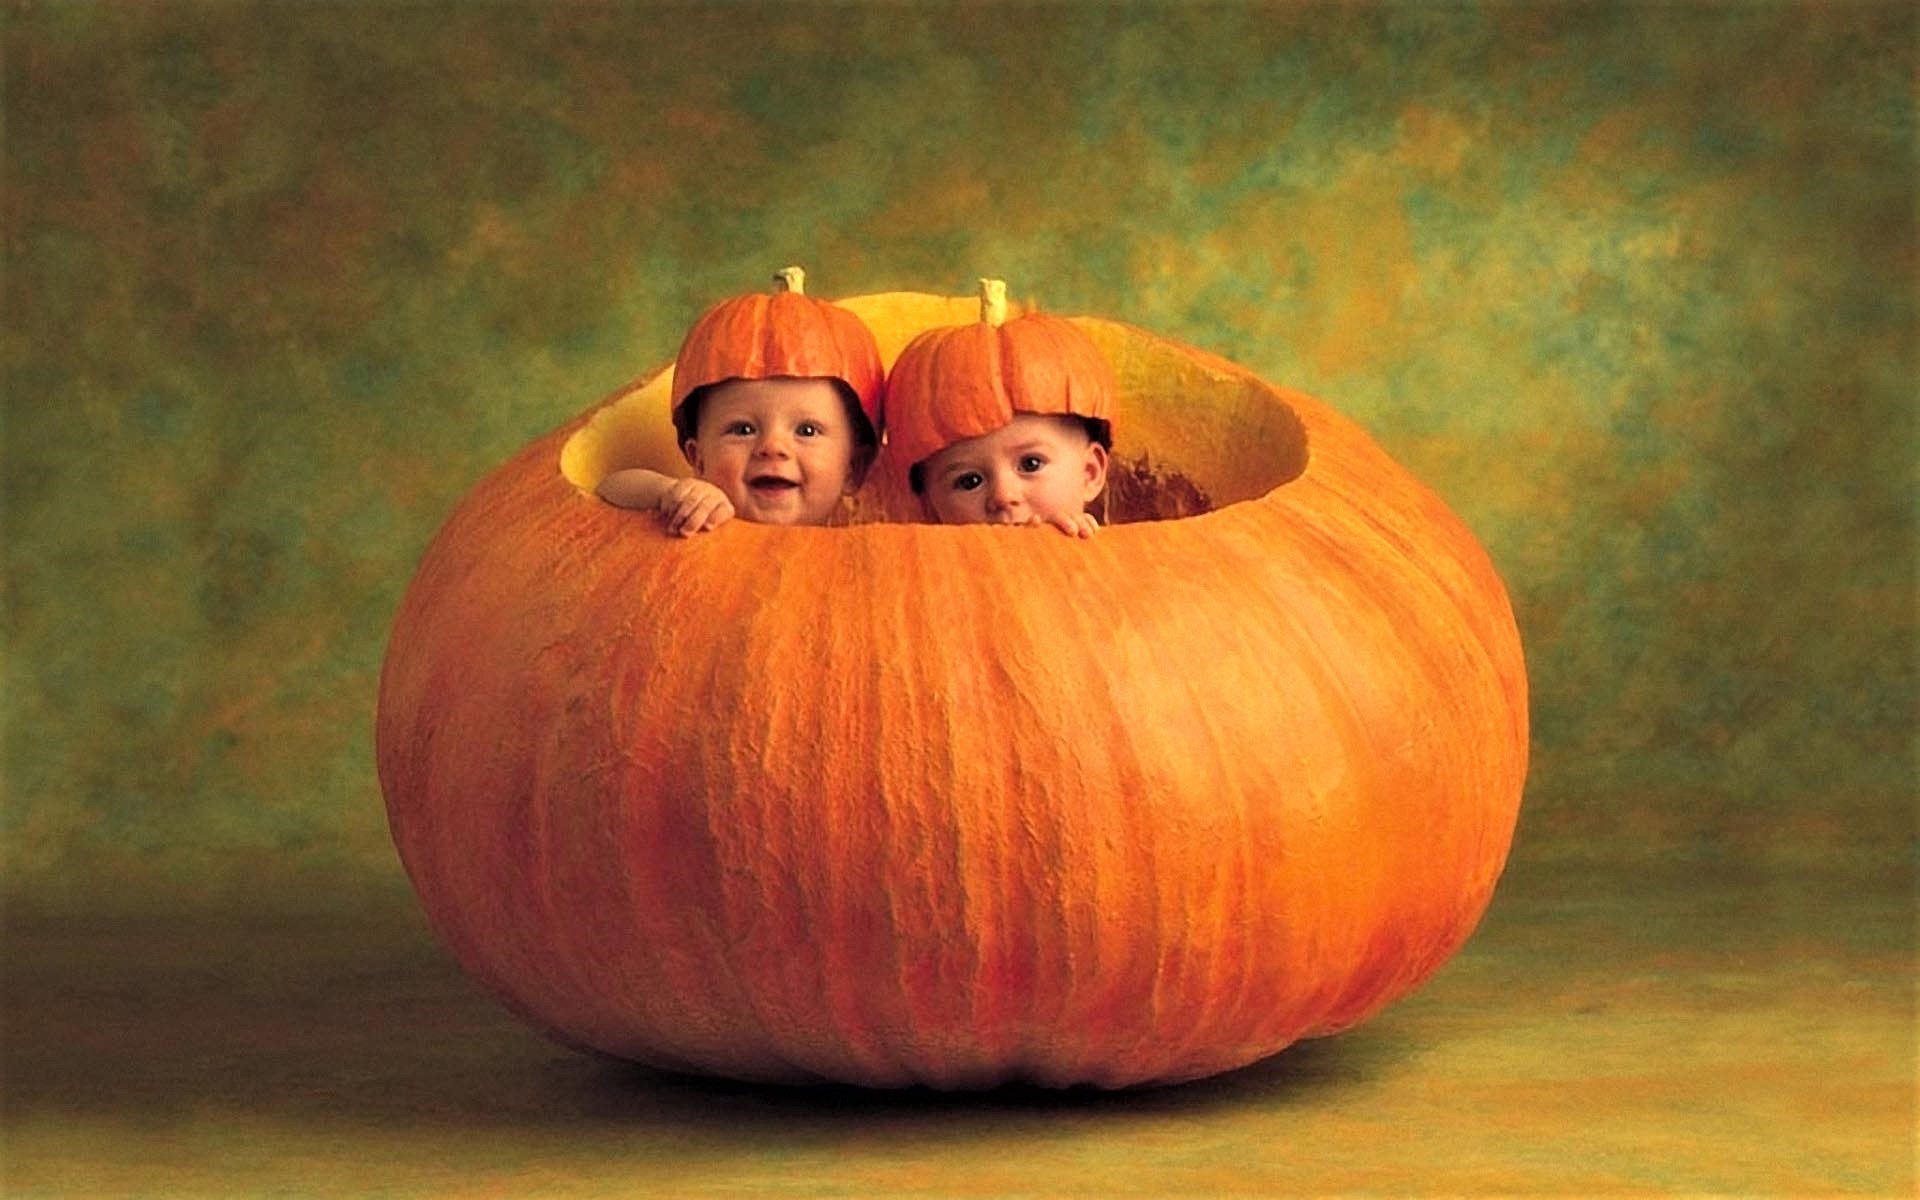 HD desktop wallpaper: Halloween, Pumpkin, Holiday, Smile, Child, Cute, Baby  download free picture #1505896